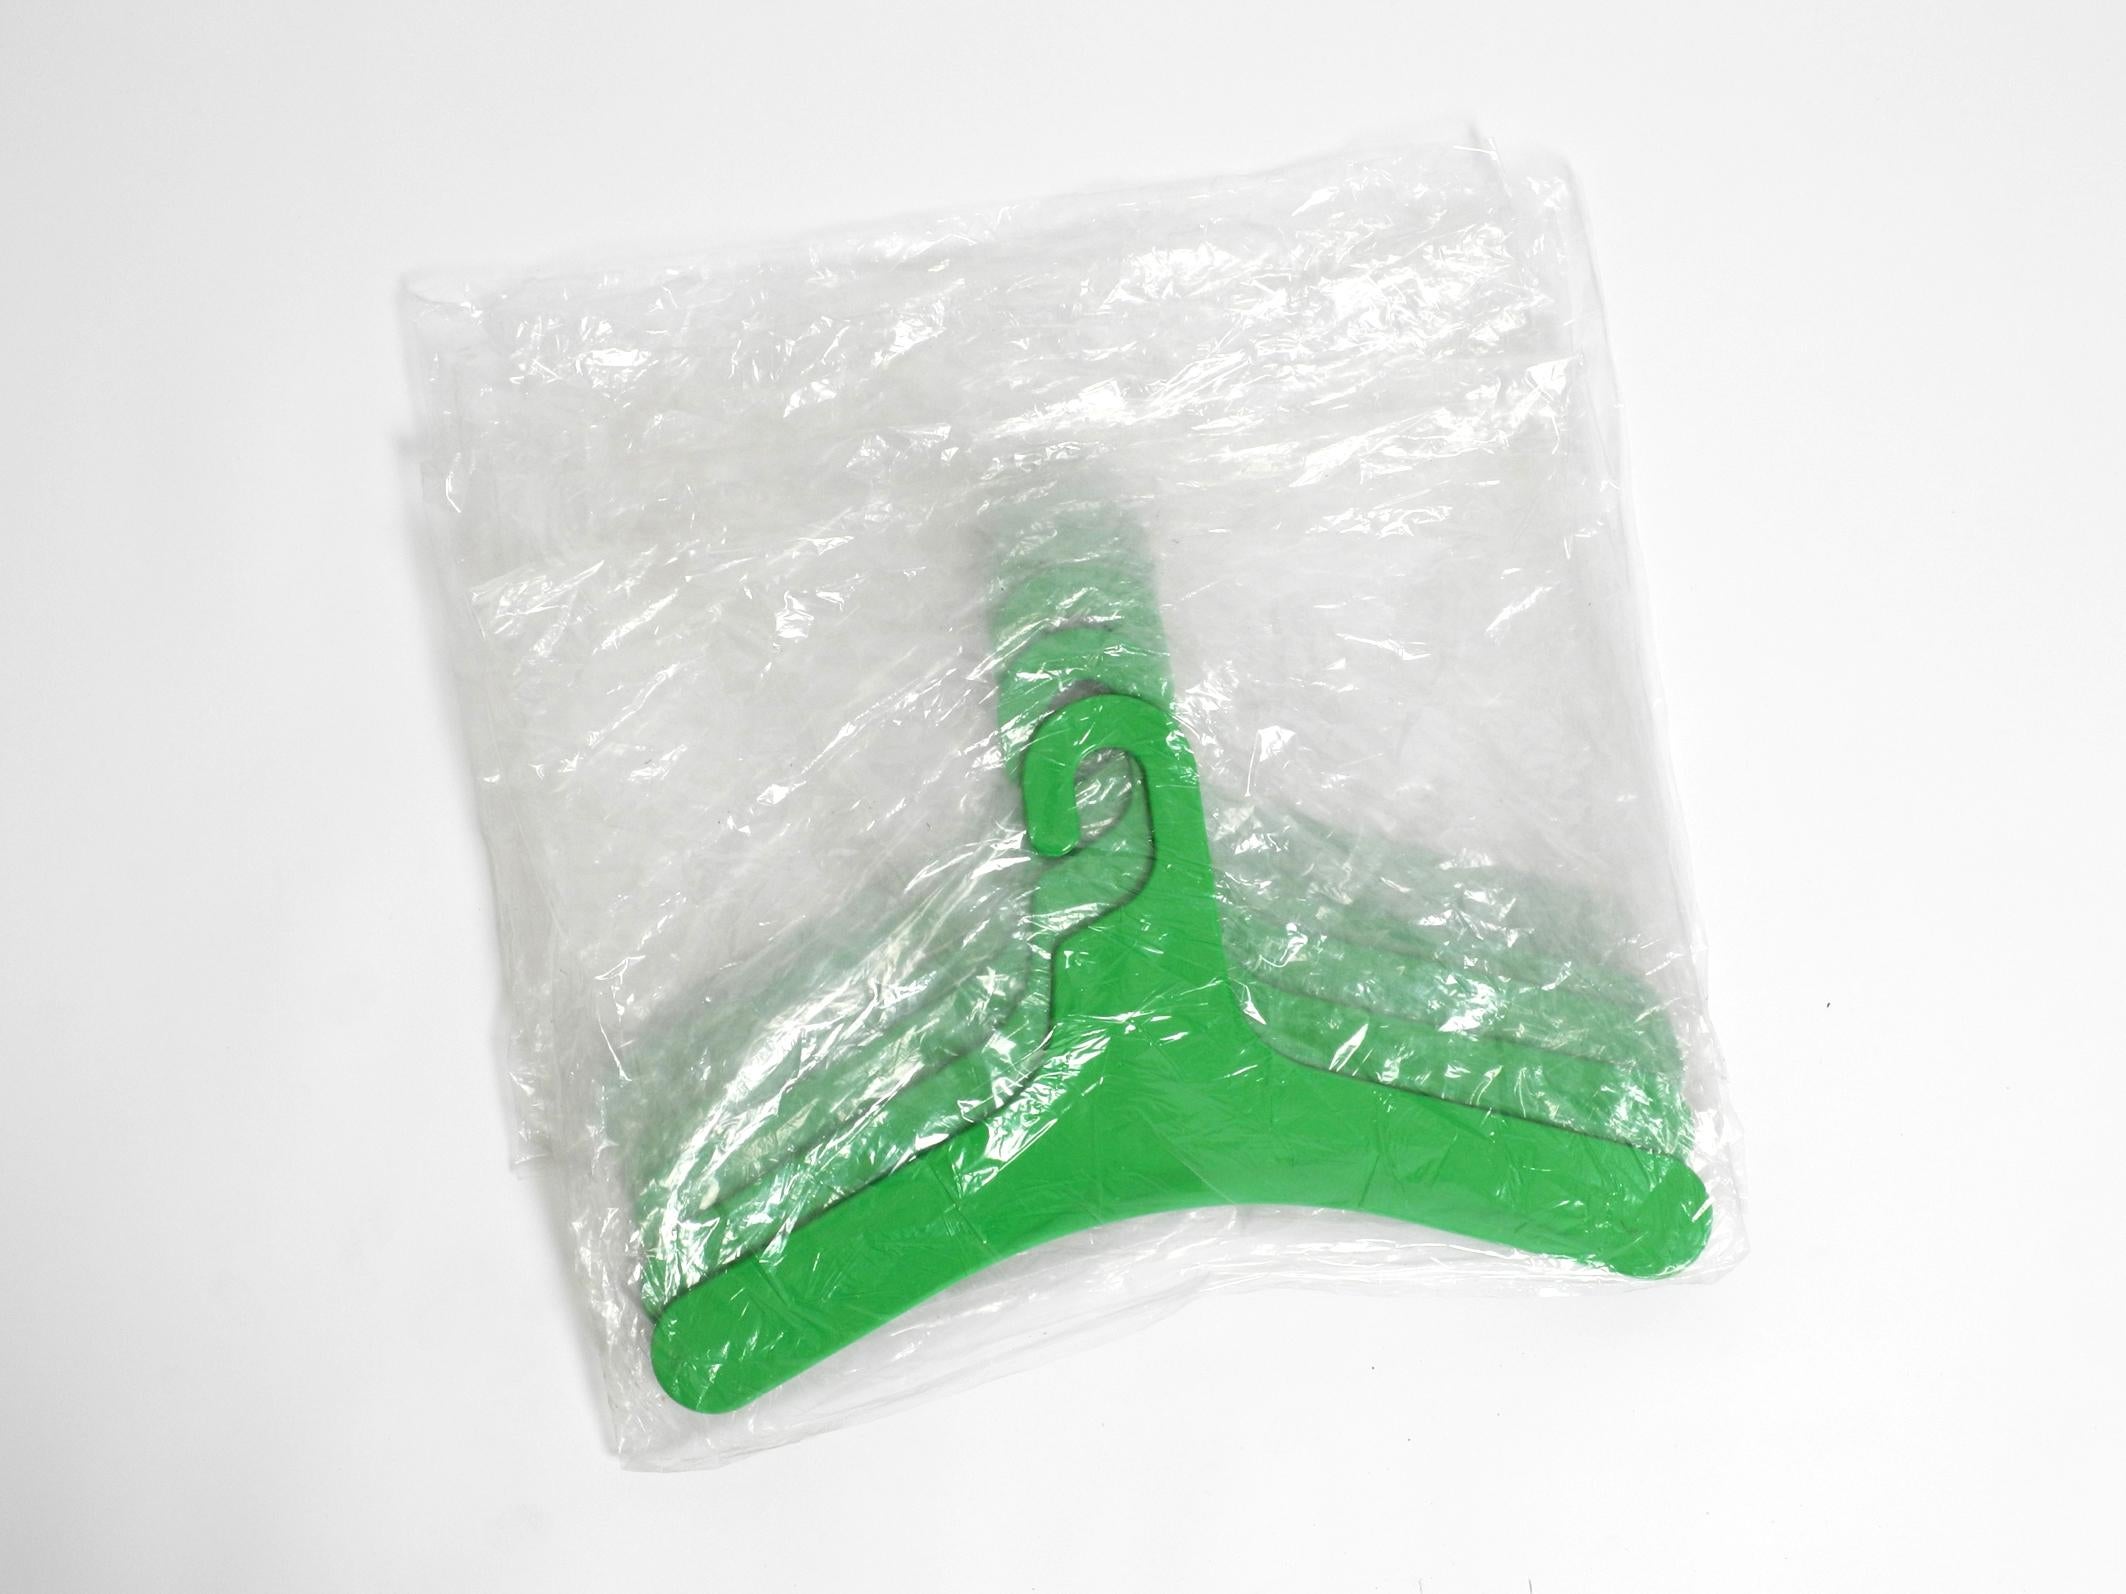 6 original unused green plastic clothes hangers from the 1970s by Ingo Maurer  1